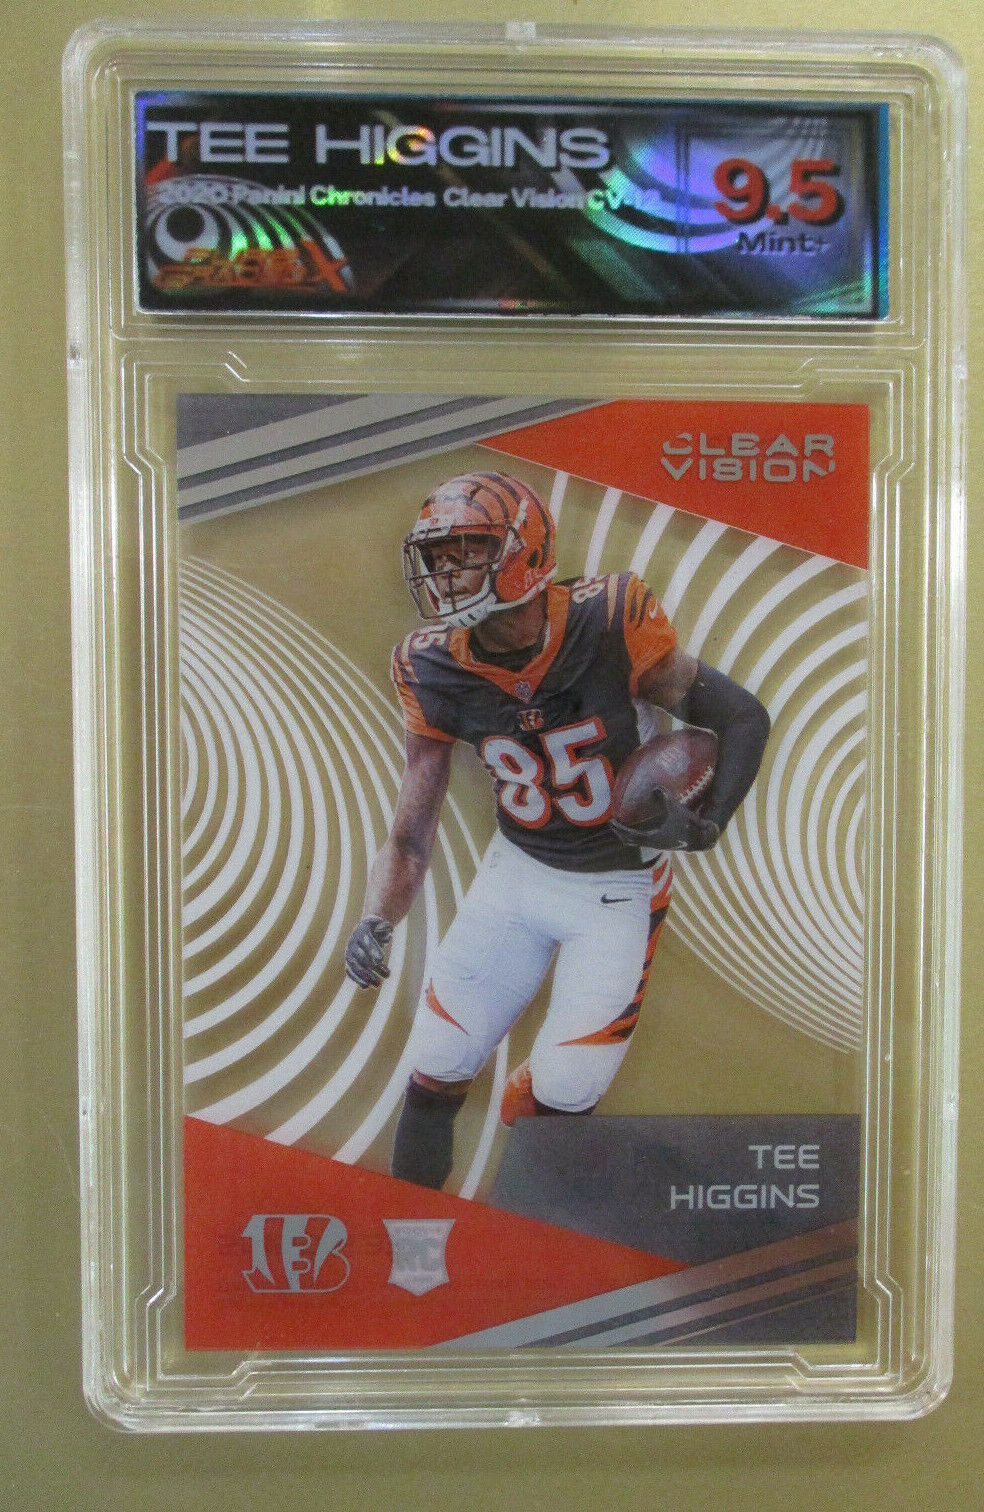 2020 Panini Chronicles Clesr Vision RC TEE HIGGINS Bengals NFL Pure Graded X 9.5